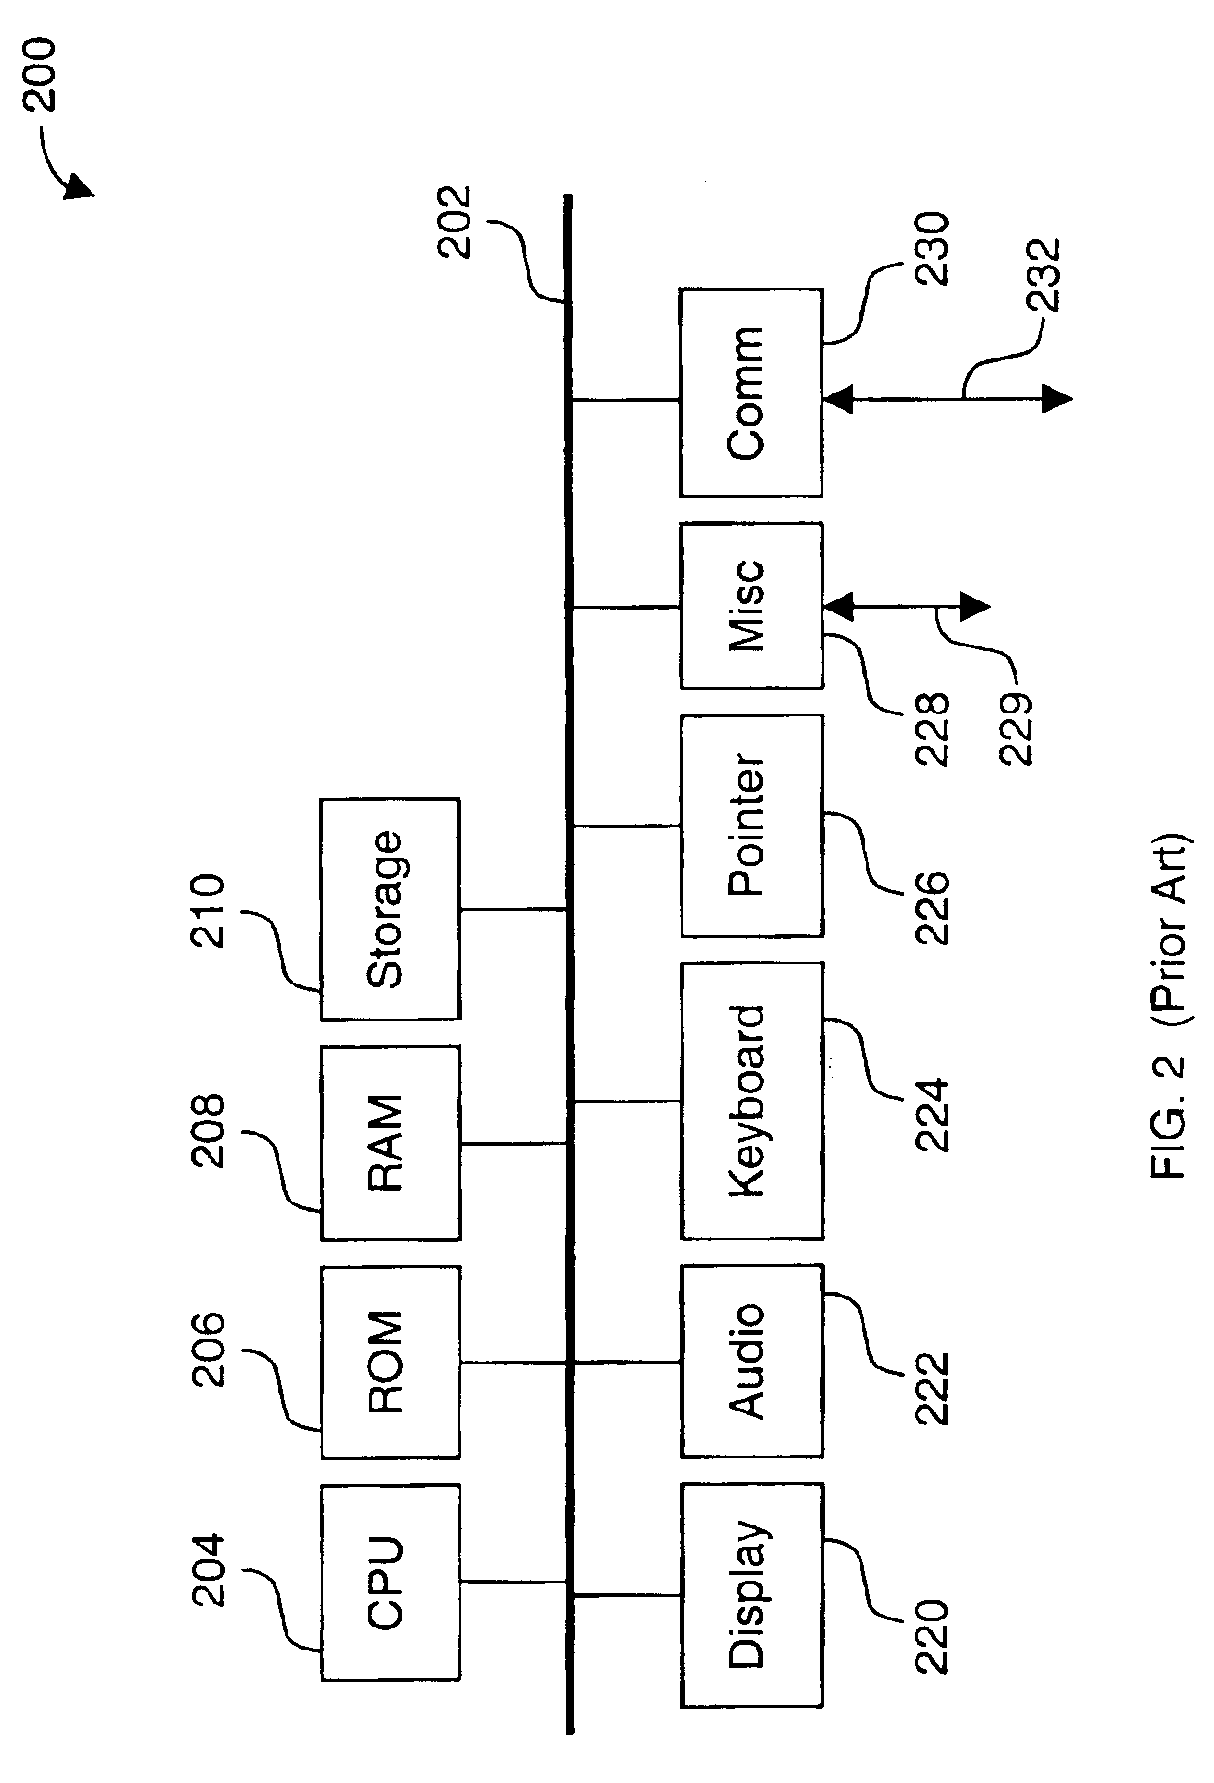 Method and apparatus for database mapping of XML objects into a relational database